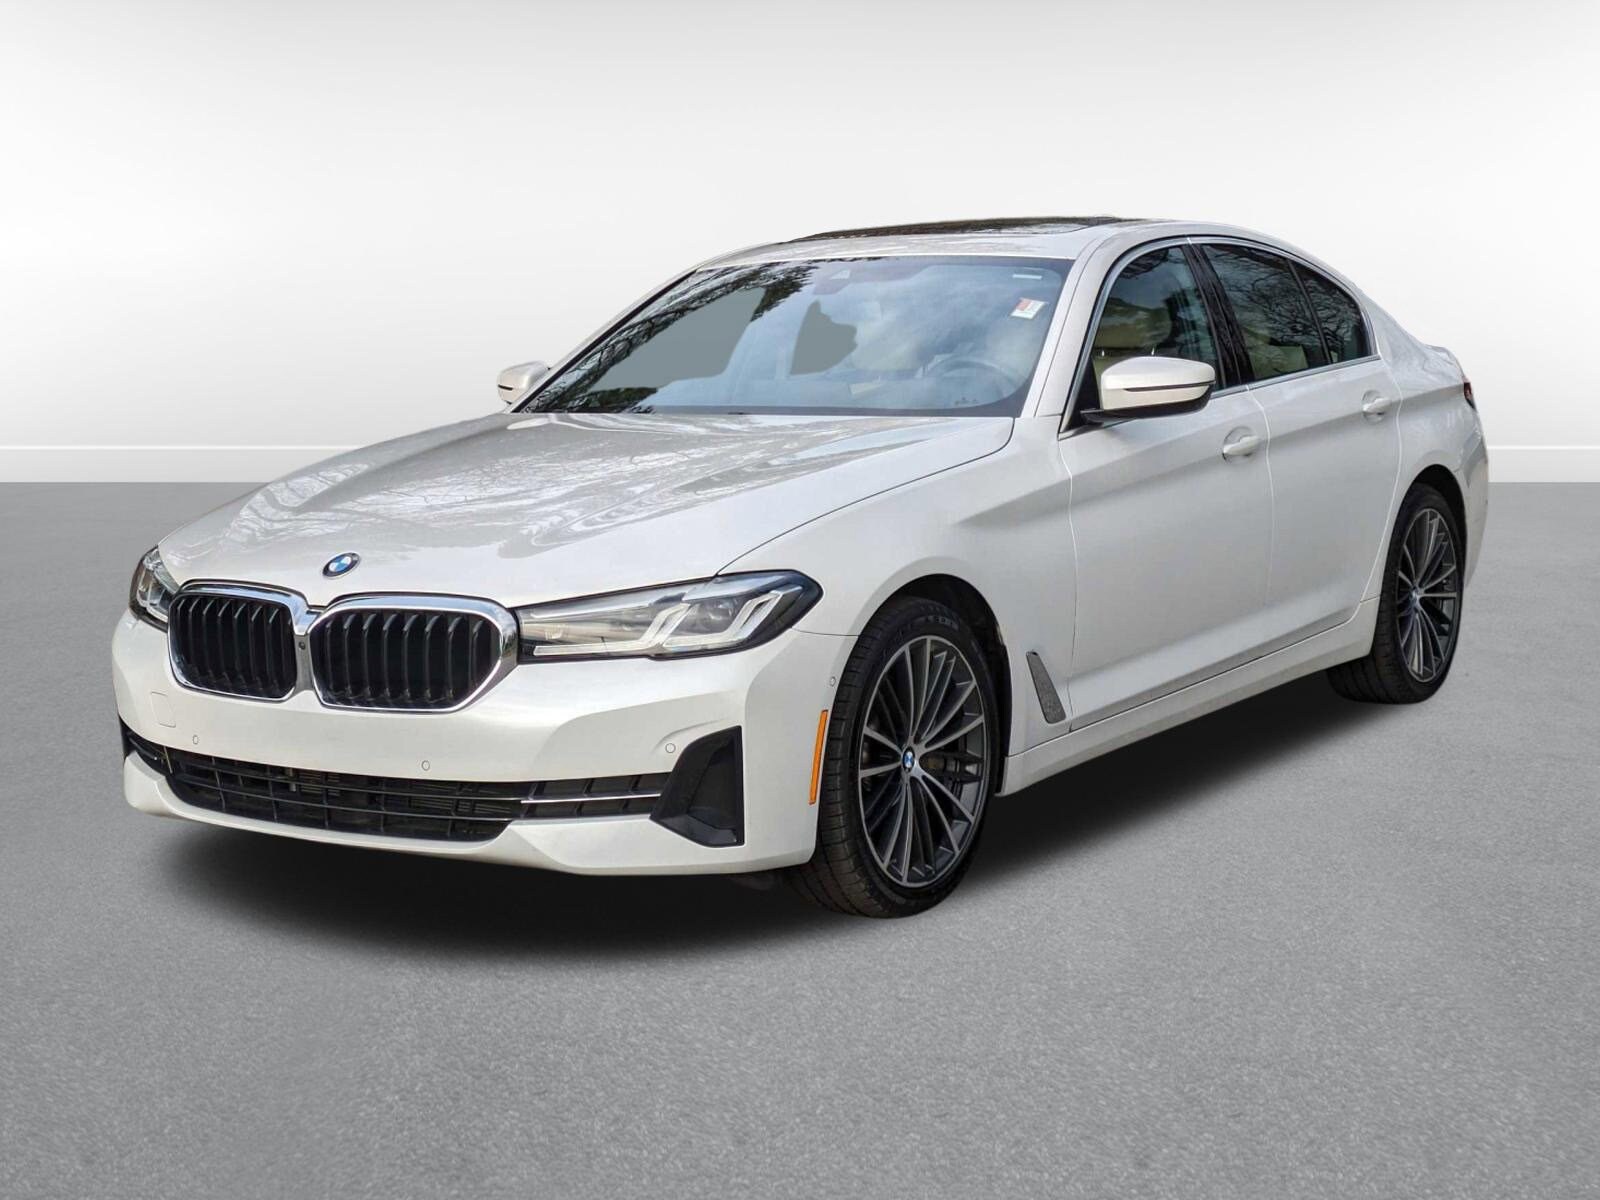 Leith BMW Service Department - Raleigh, Durham, Cary NC